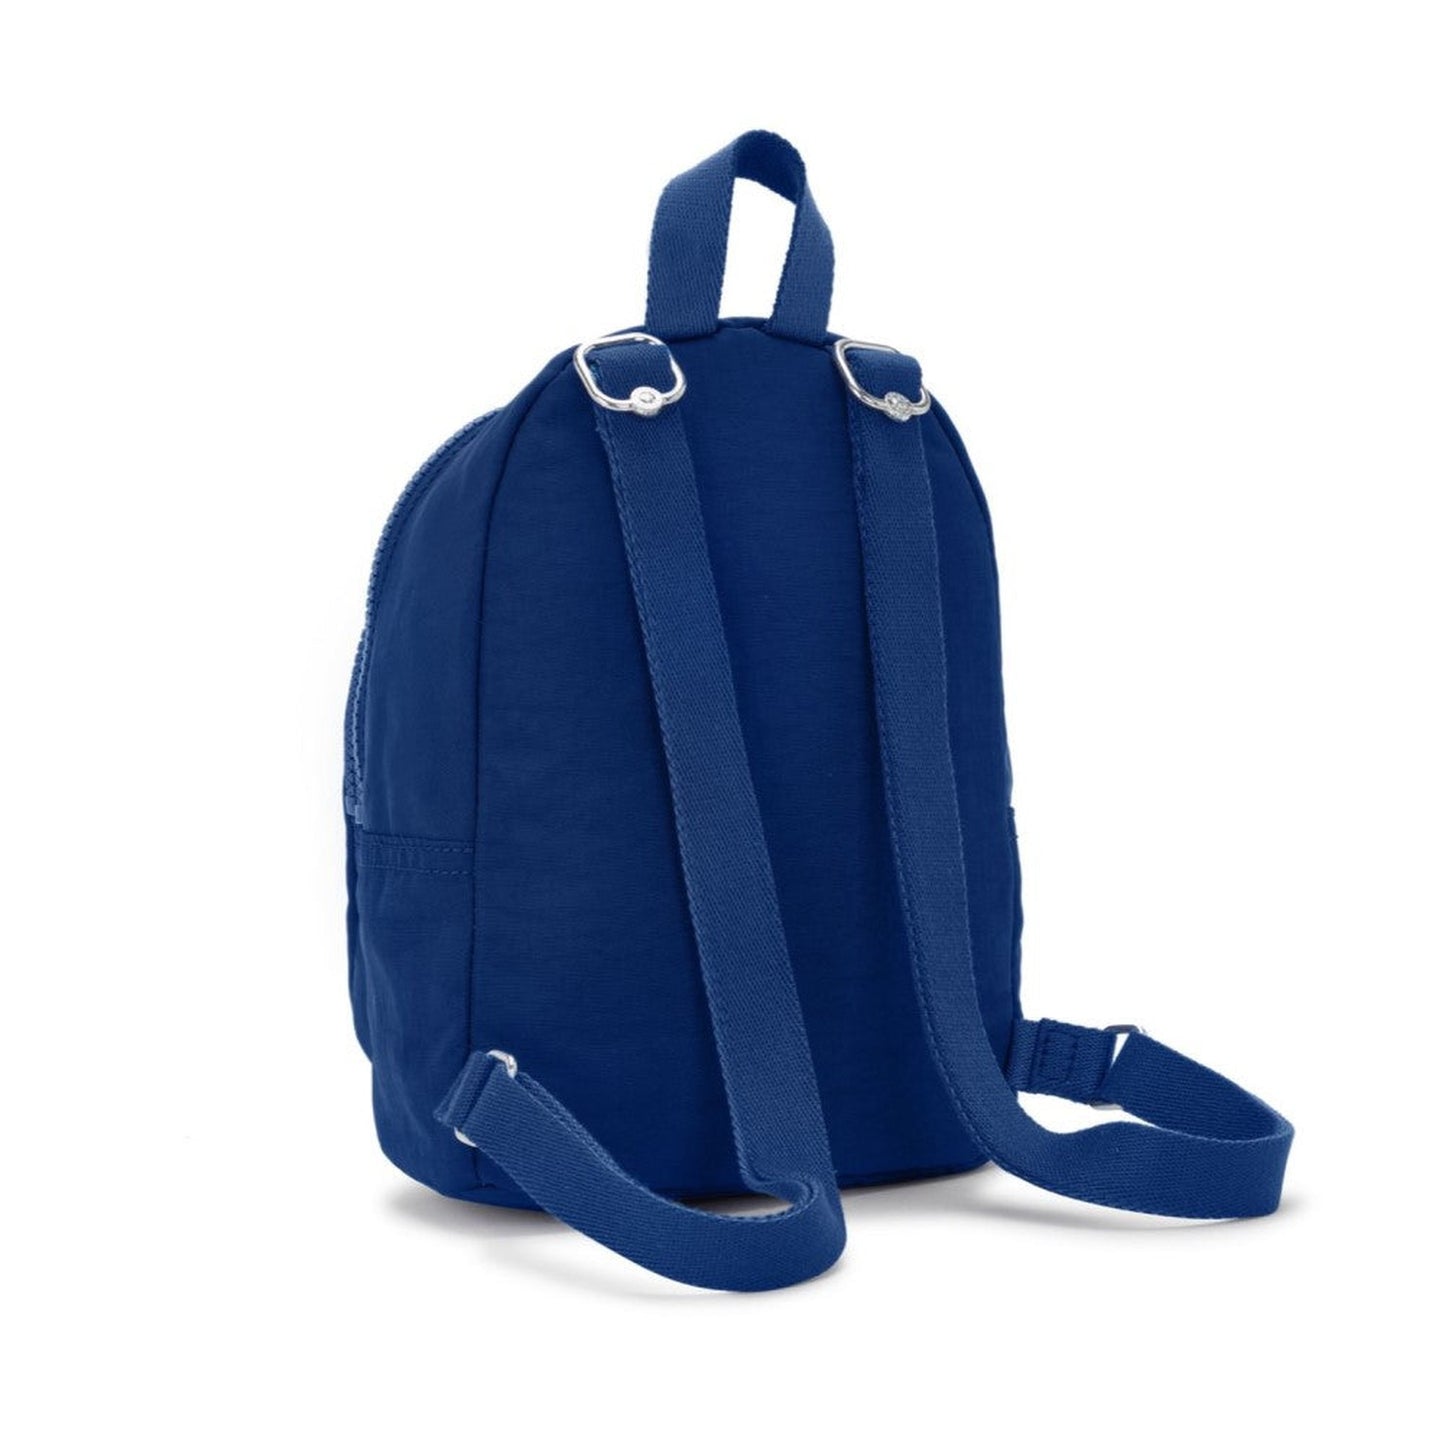 Buy Kipling New Delia Compact Backpack | Deep Sky Blue Small - at Sacred Remedy Online